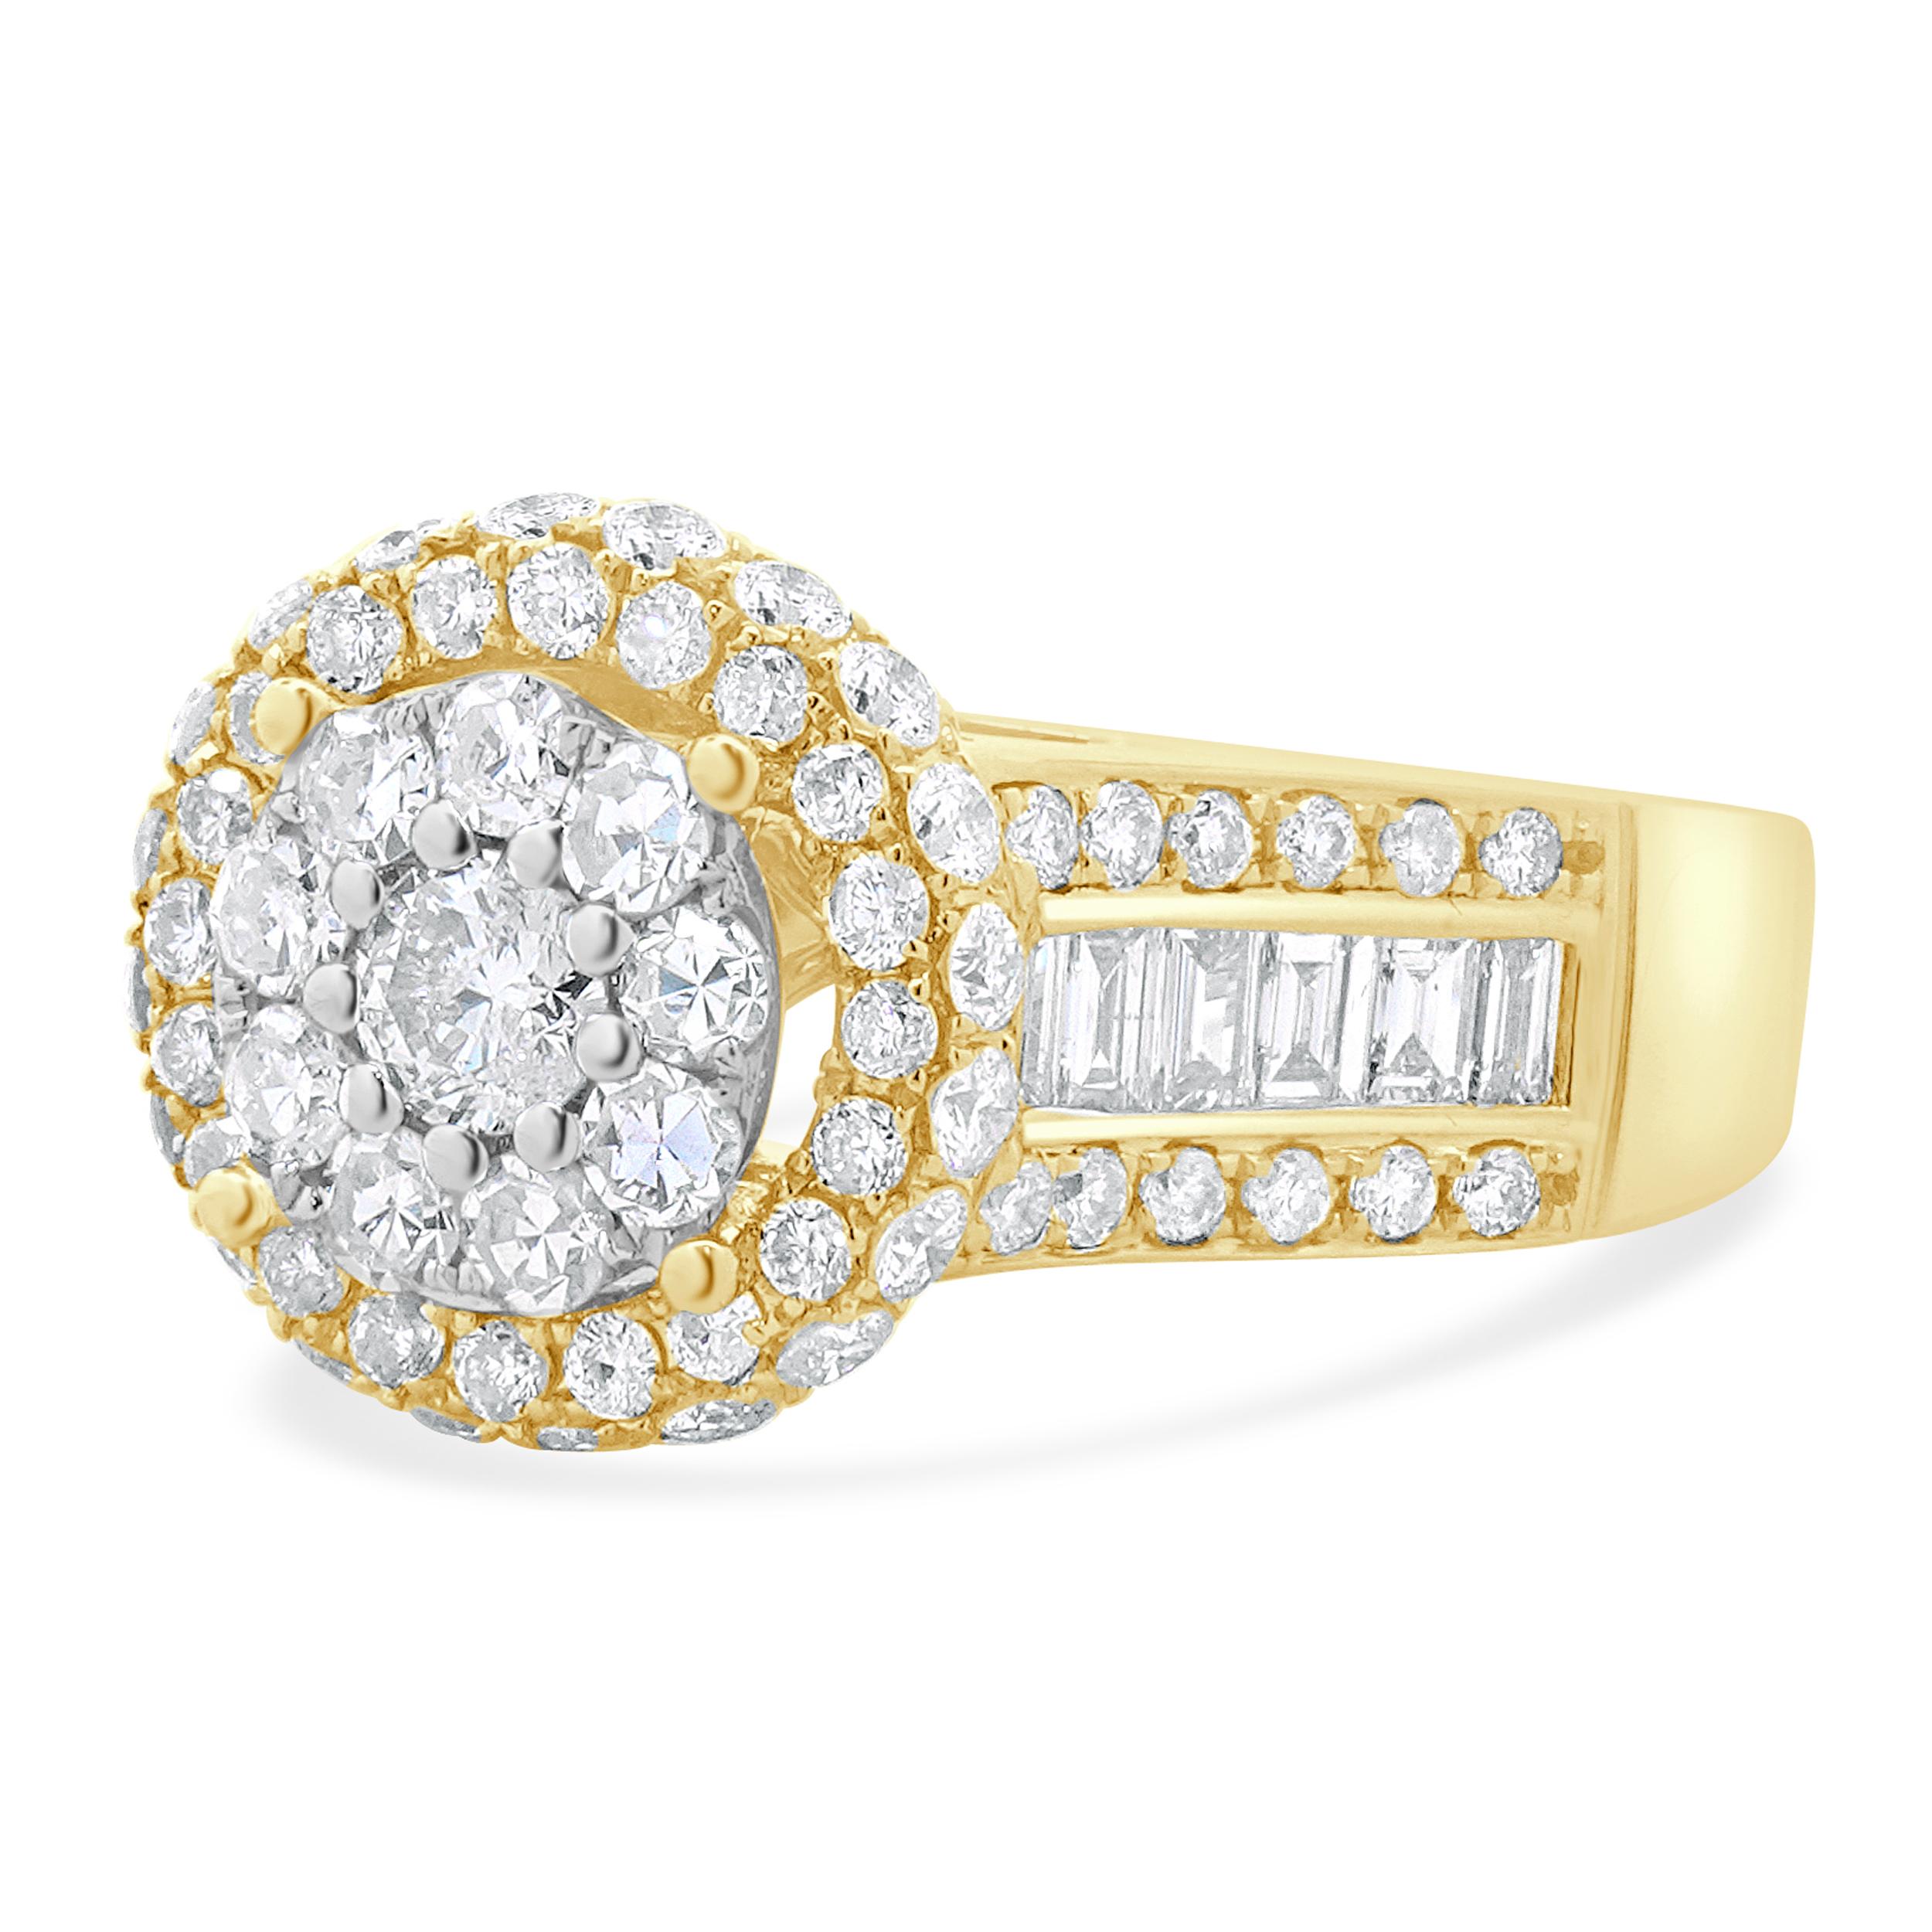 Designer: custom
Material: 14K yellow gold
Diamond: 95 round brilliant cut = 1.98cttw
Color: G / H
Clarity: VS-SI2
Dimensions: ring top measures 11.4mm wide
Ring Size: 6 (complimentary sizing available)
Weight: 4.14 grams
